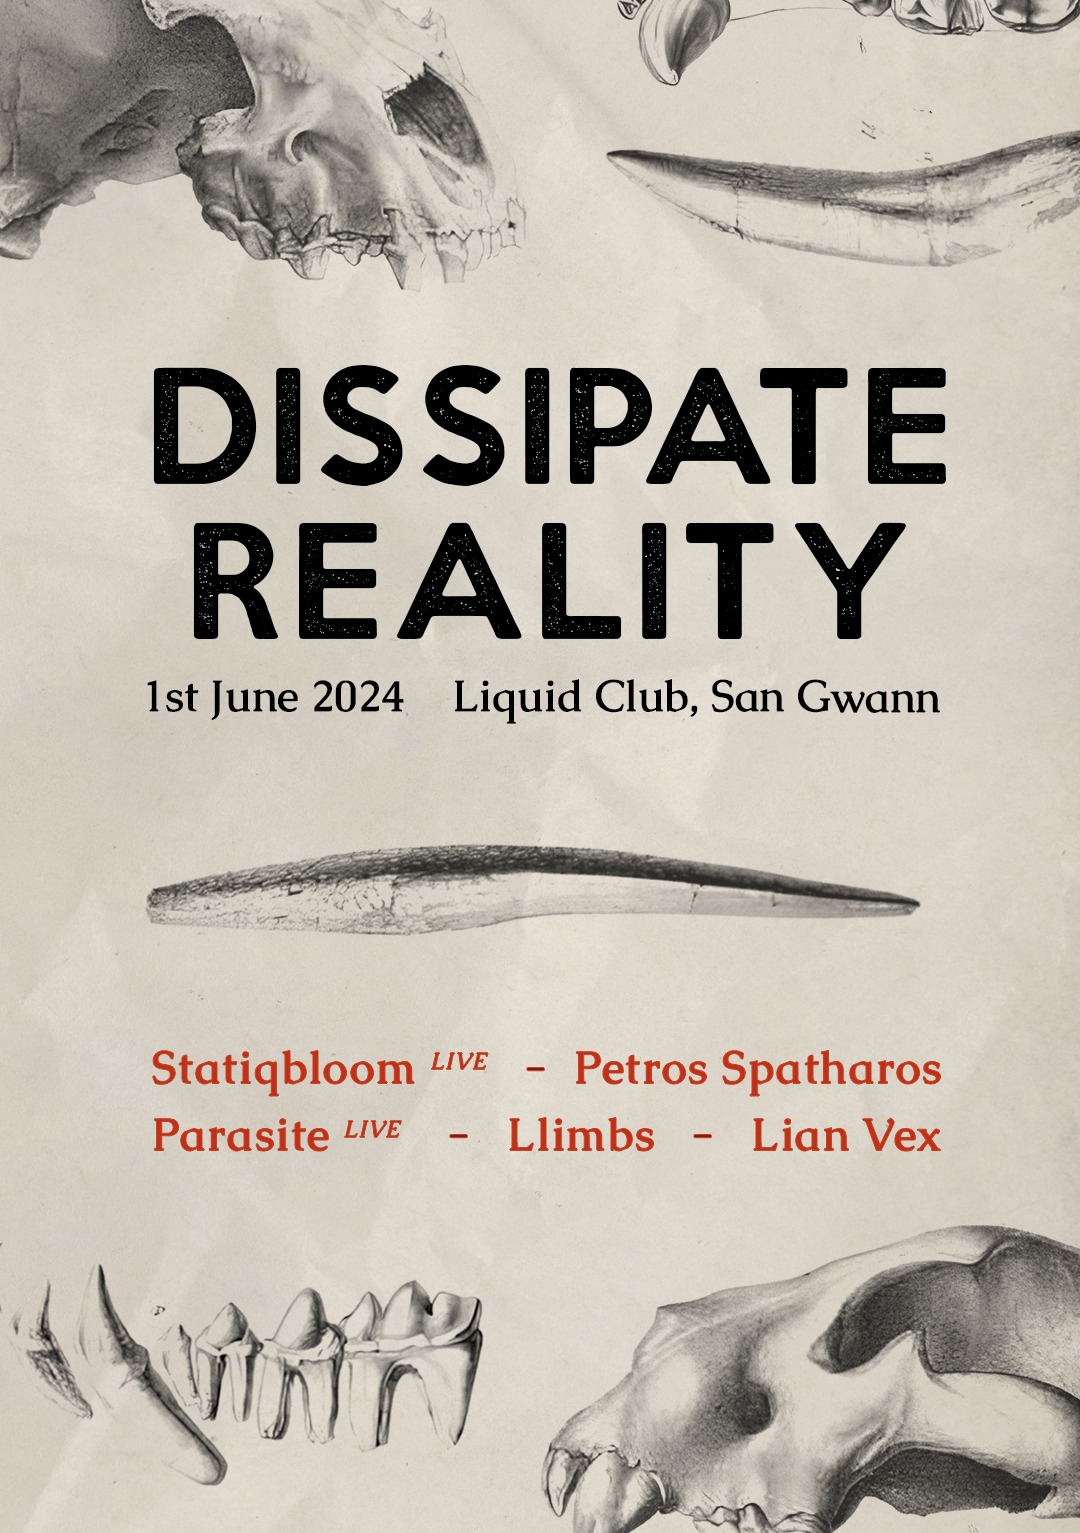 Dissipate Reality poster